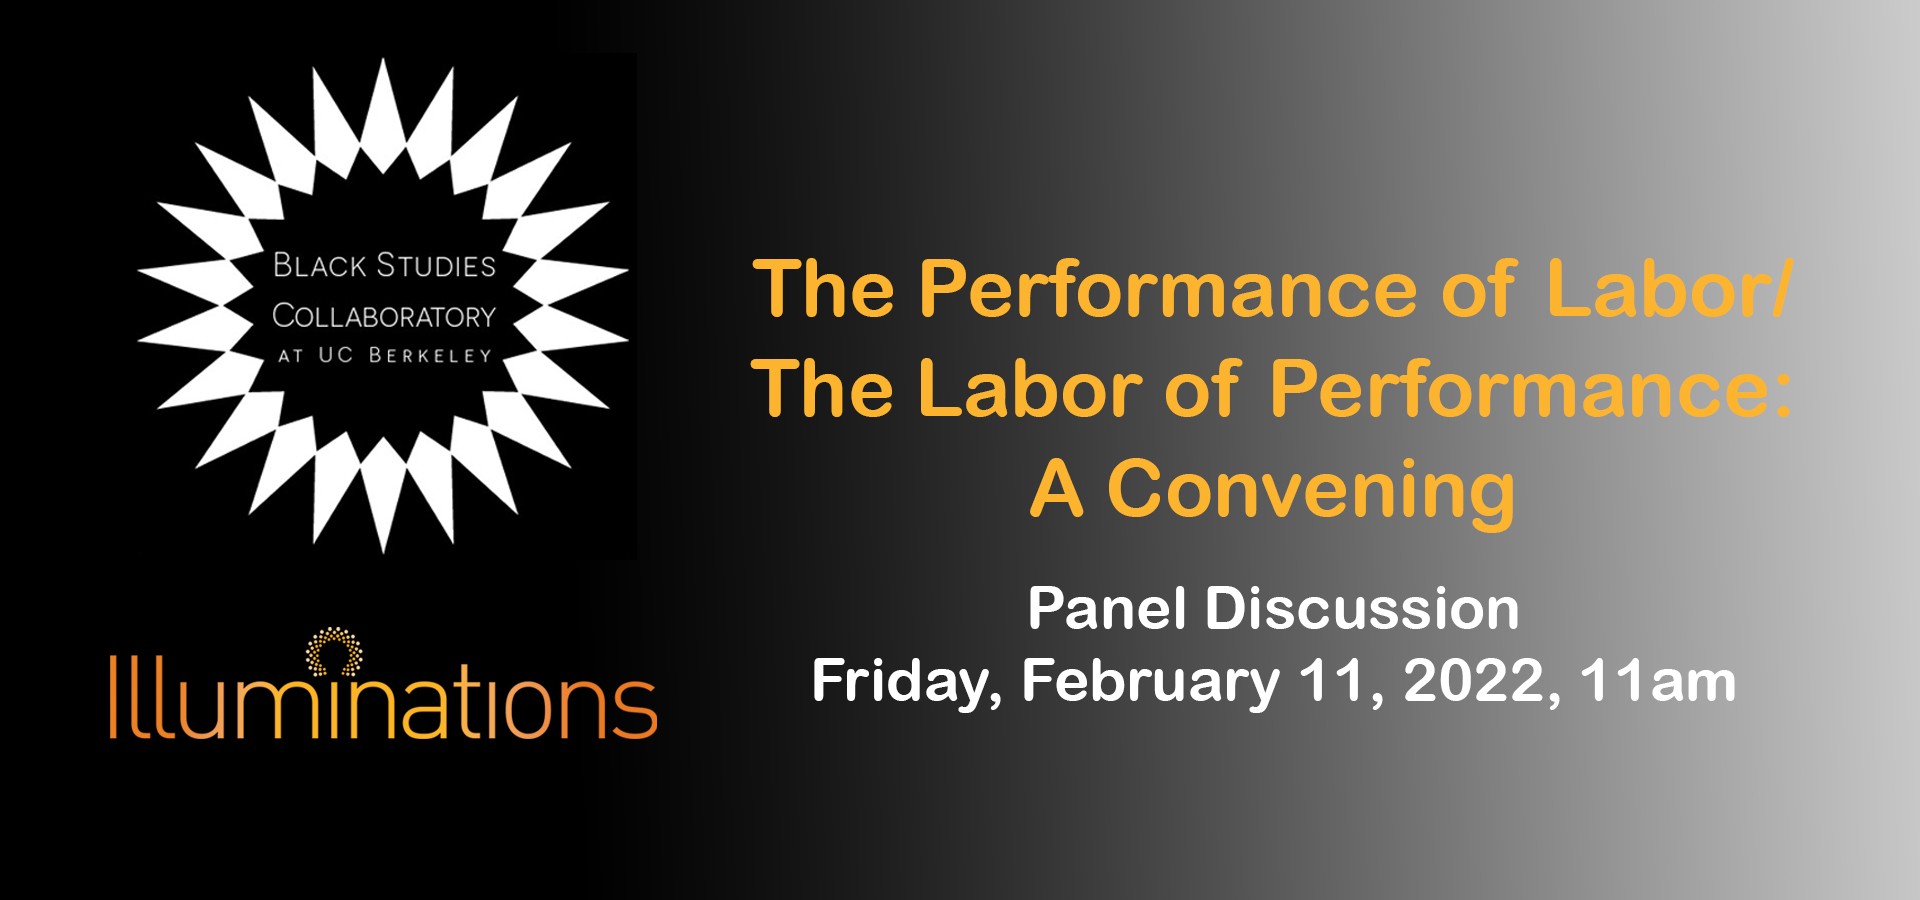 The Performance of Labor/The Labor of Performance: A Convening Panel. Feb 11, 2022, 11am